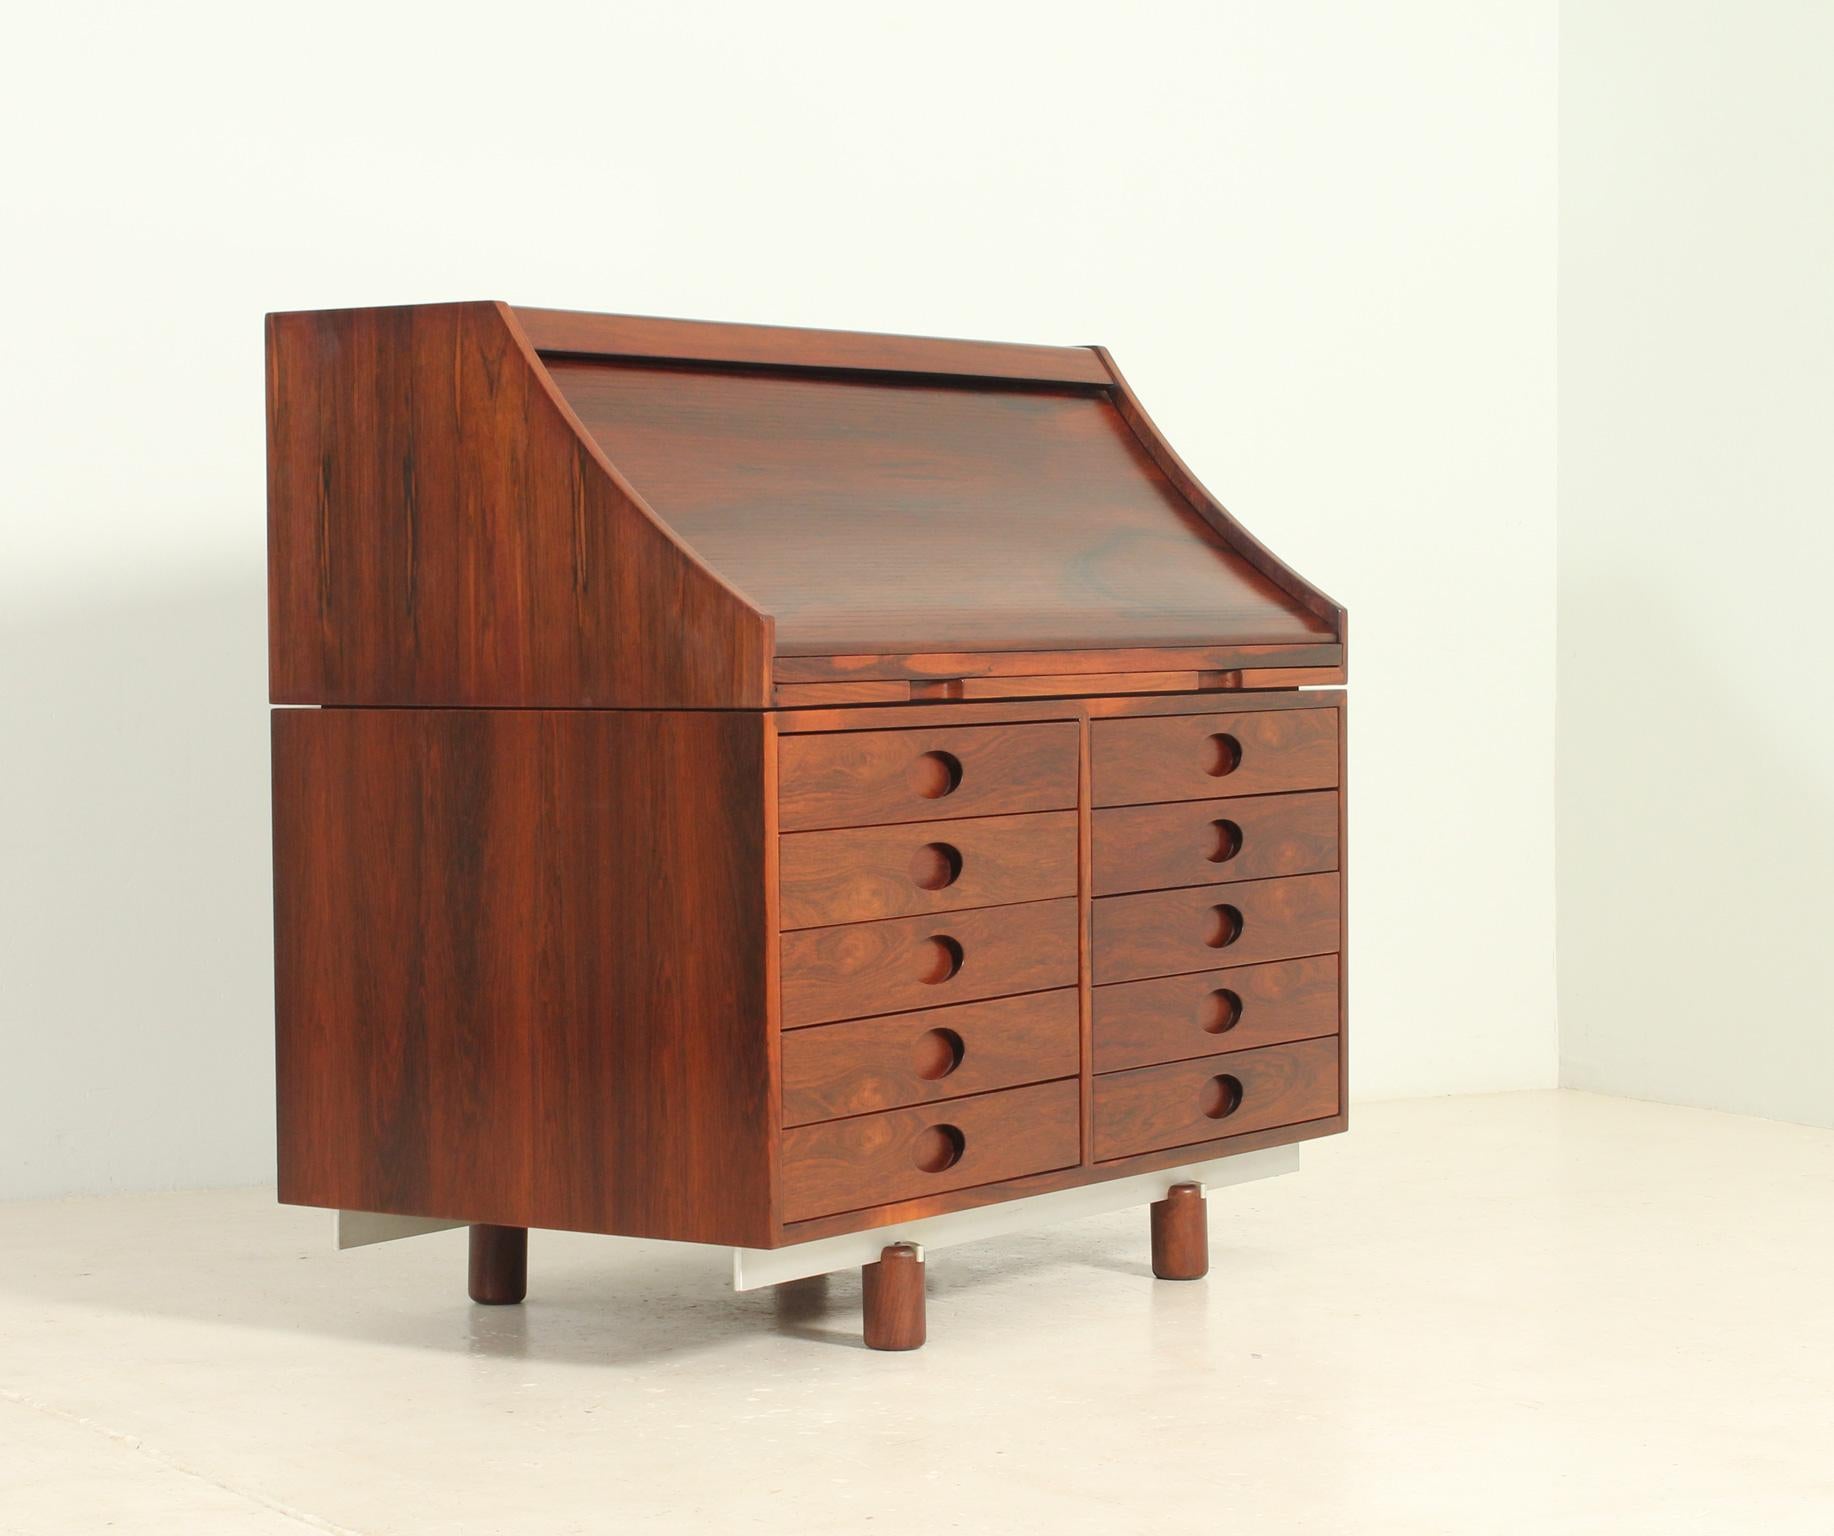 Writing desk model 807 designed in 1961 by Gianfranco Frattini for Bernini, Italy. Tambour top that hides small drawers and a pull out leather writing surface, ten drawers in the lower front side. Hardwood, aluminium and leather.